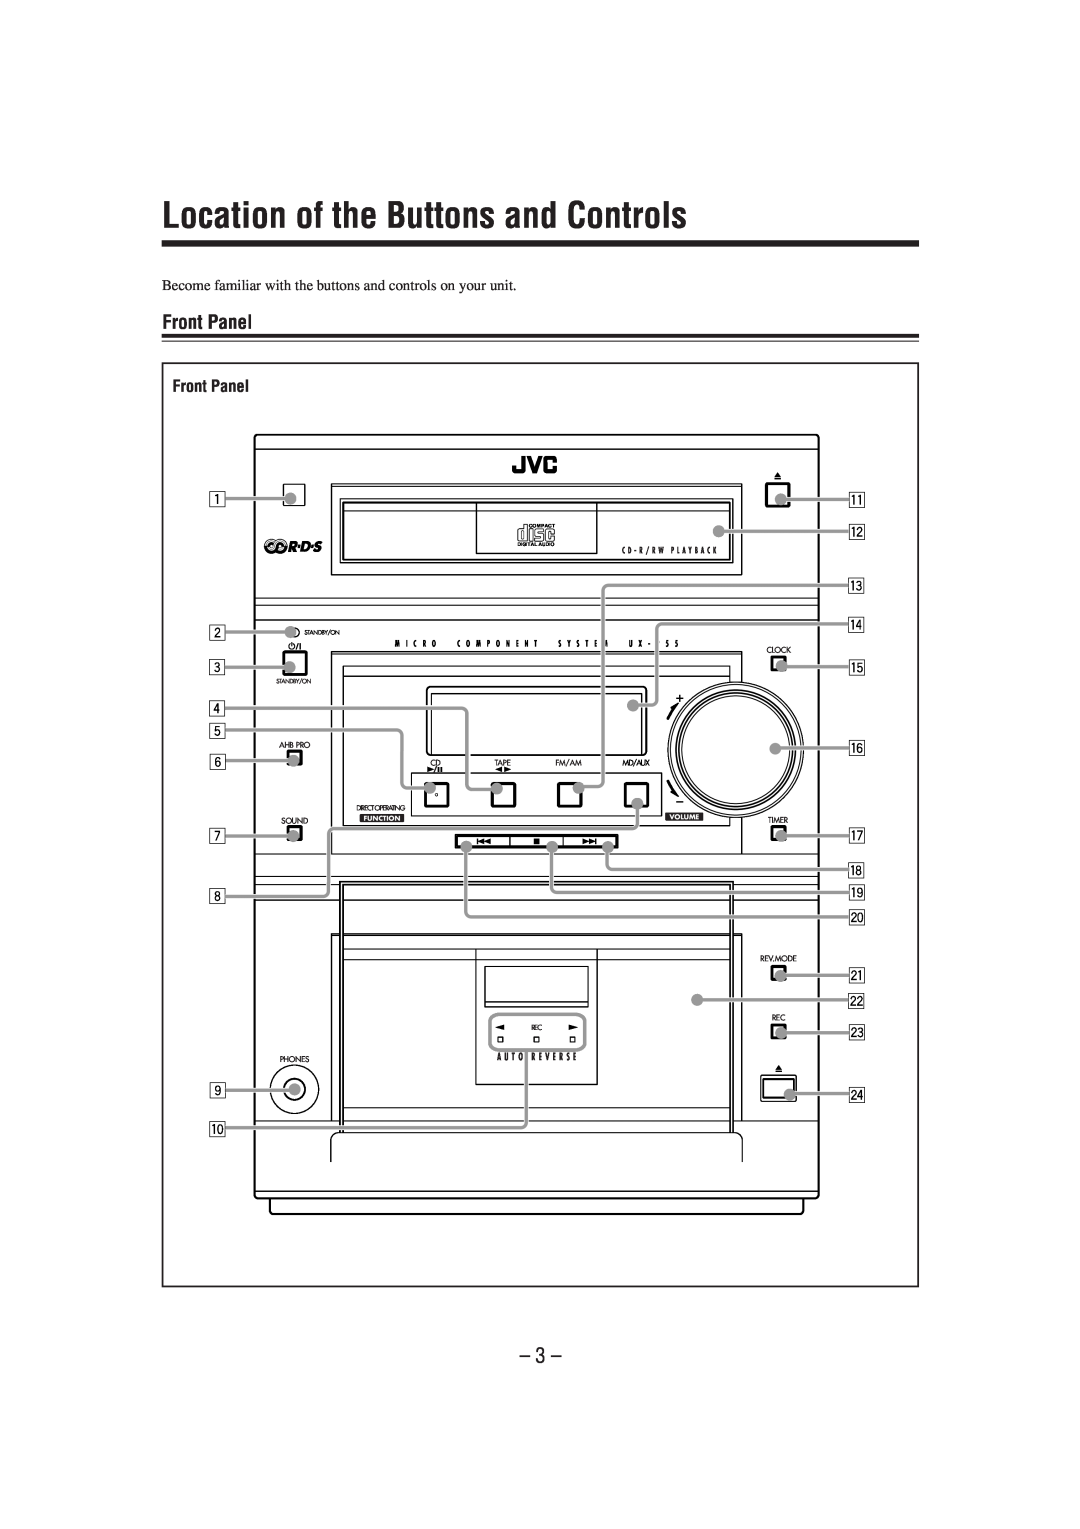 JVC UX-P55 manual Location of the Buttons and Controls, Front Panel 